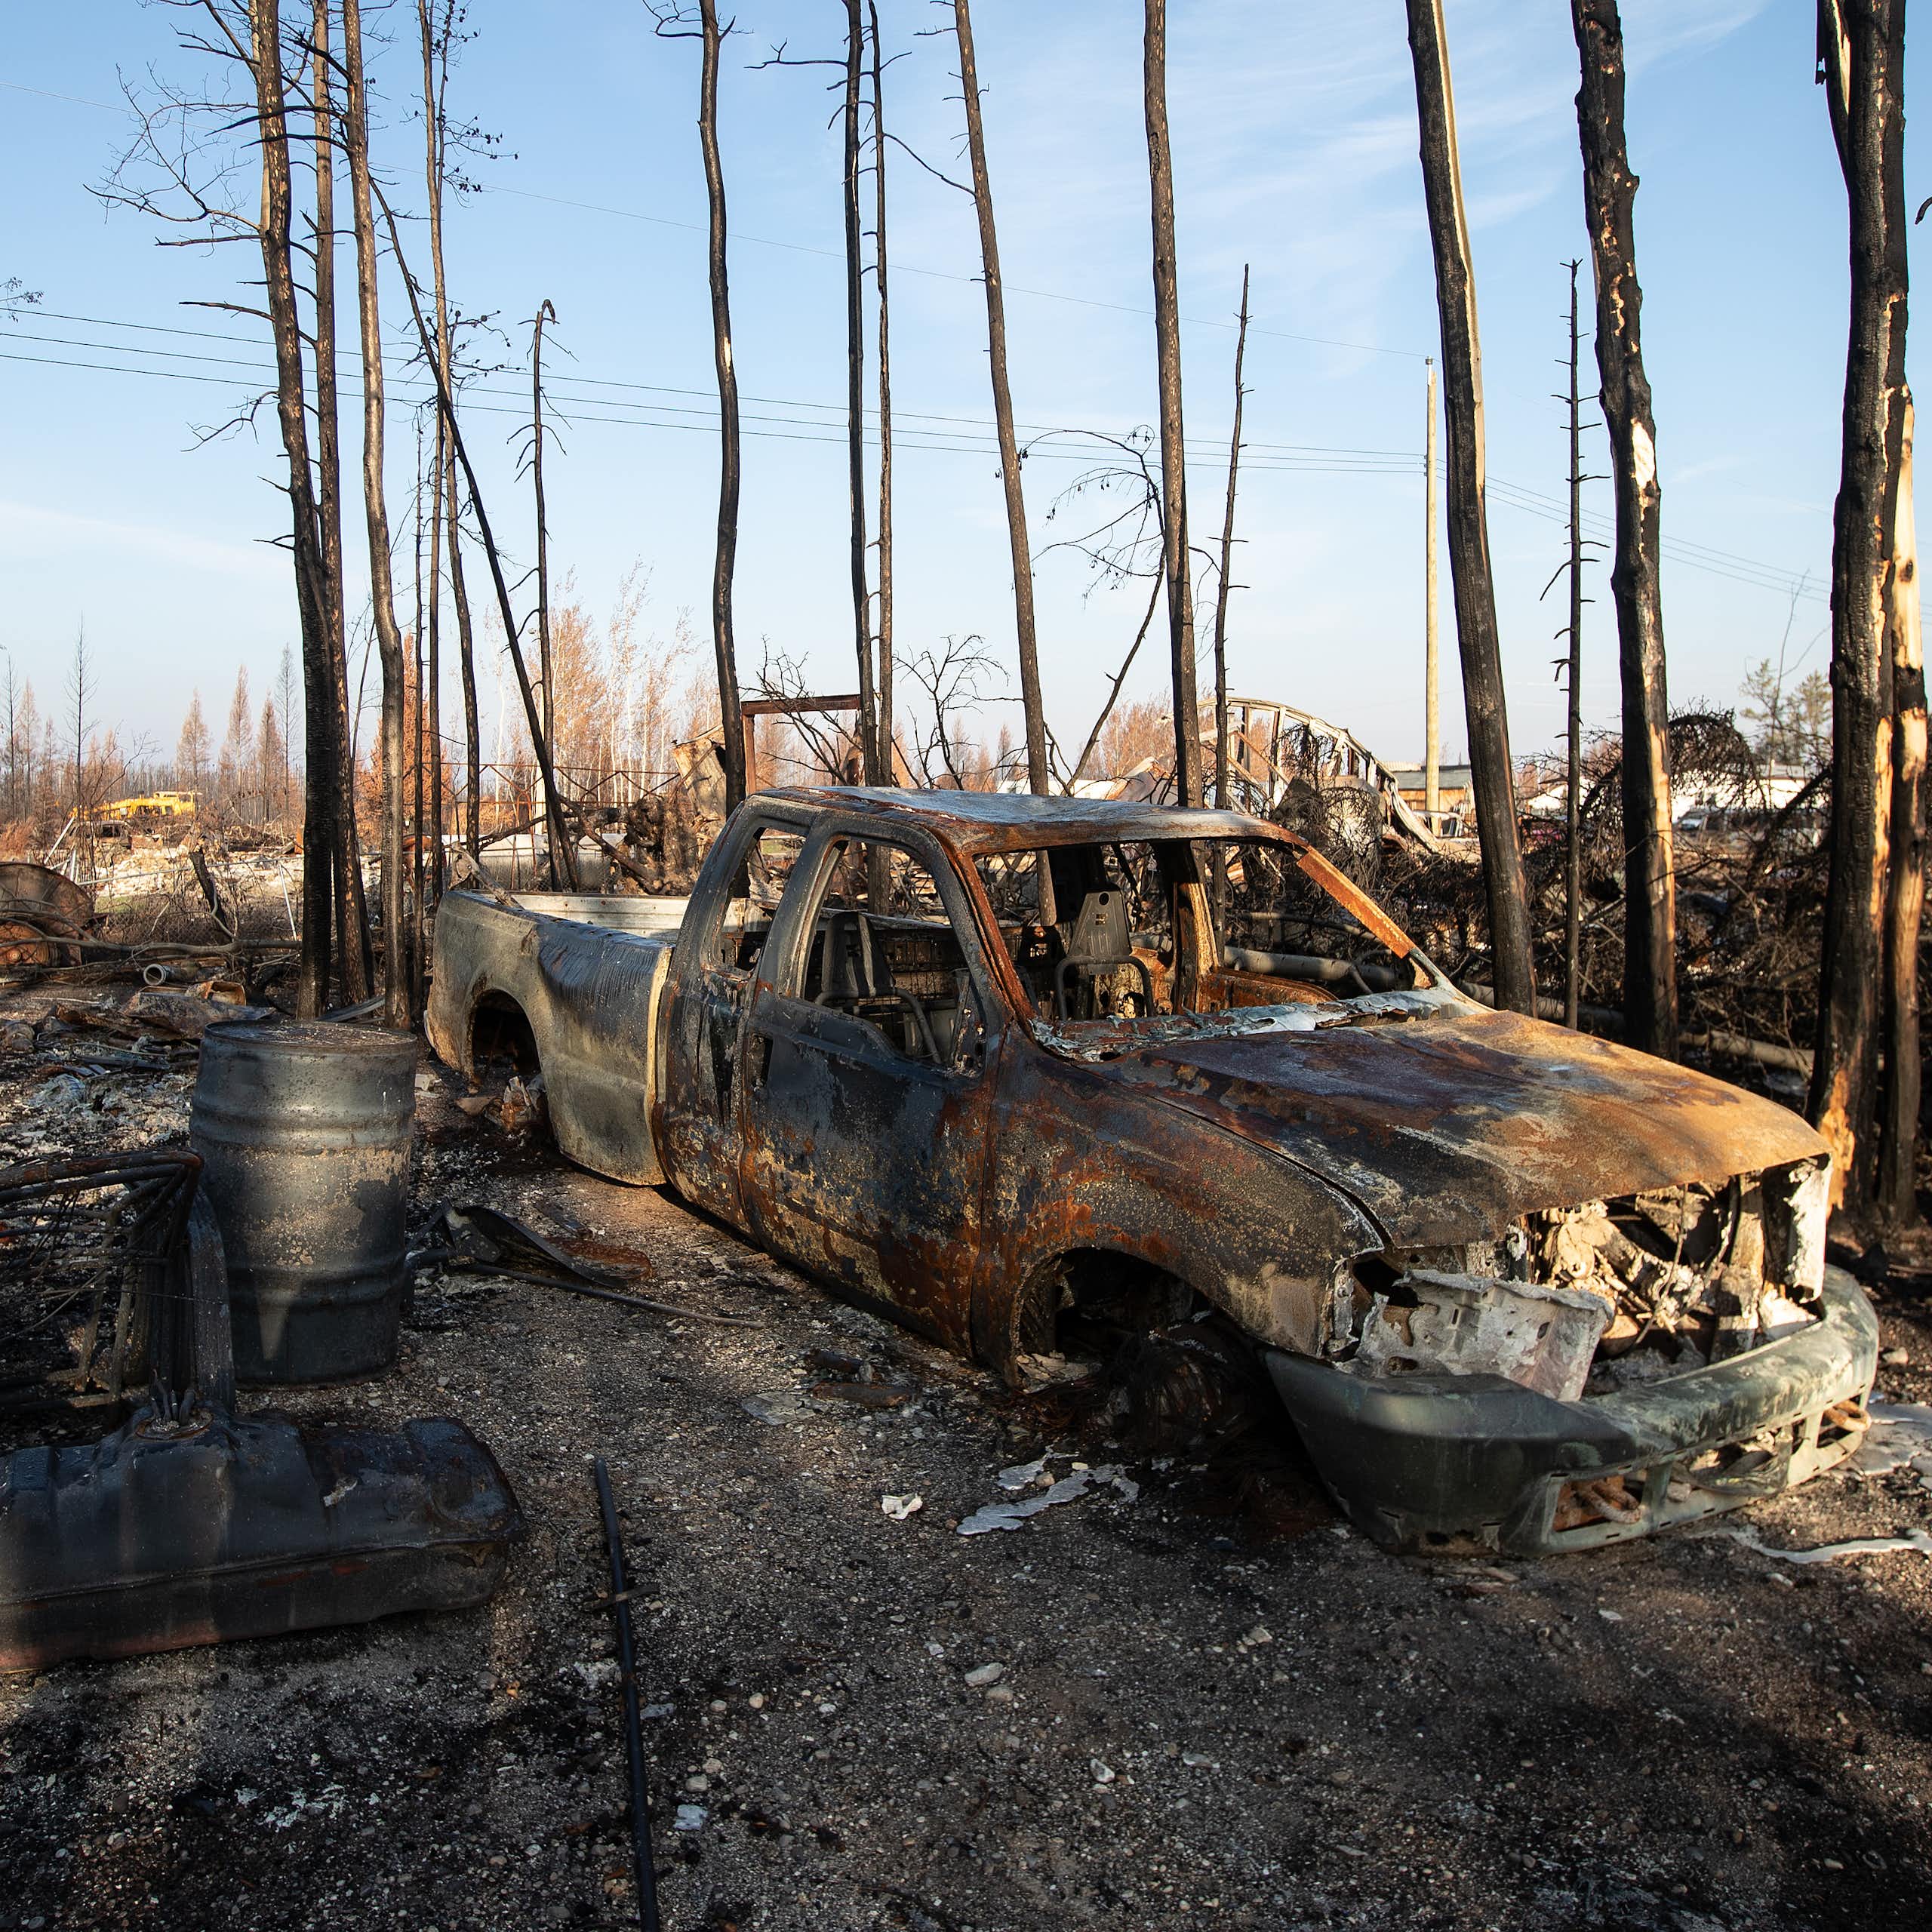 A burned out truck and assorted rubble is seen in the aftermath of a forest fire.